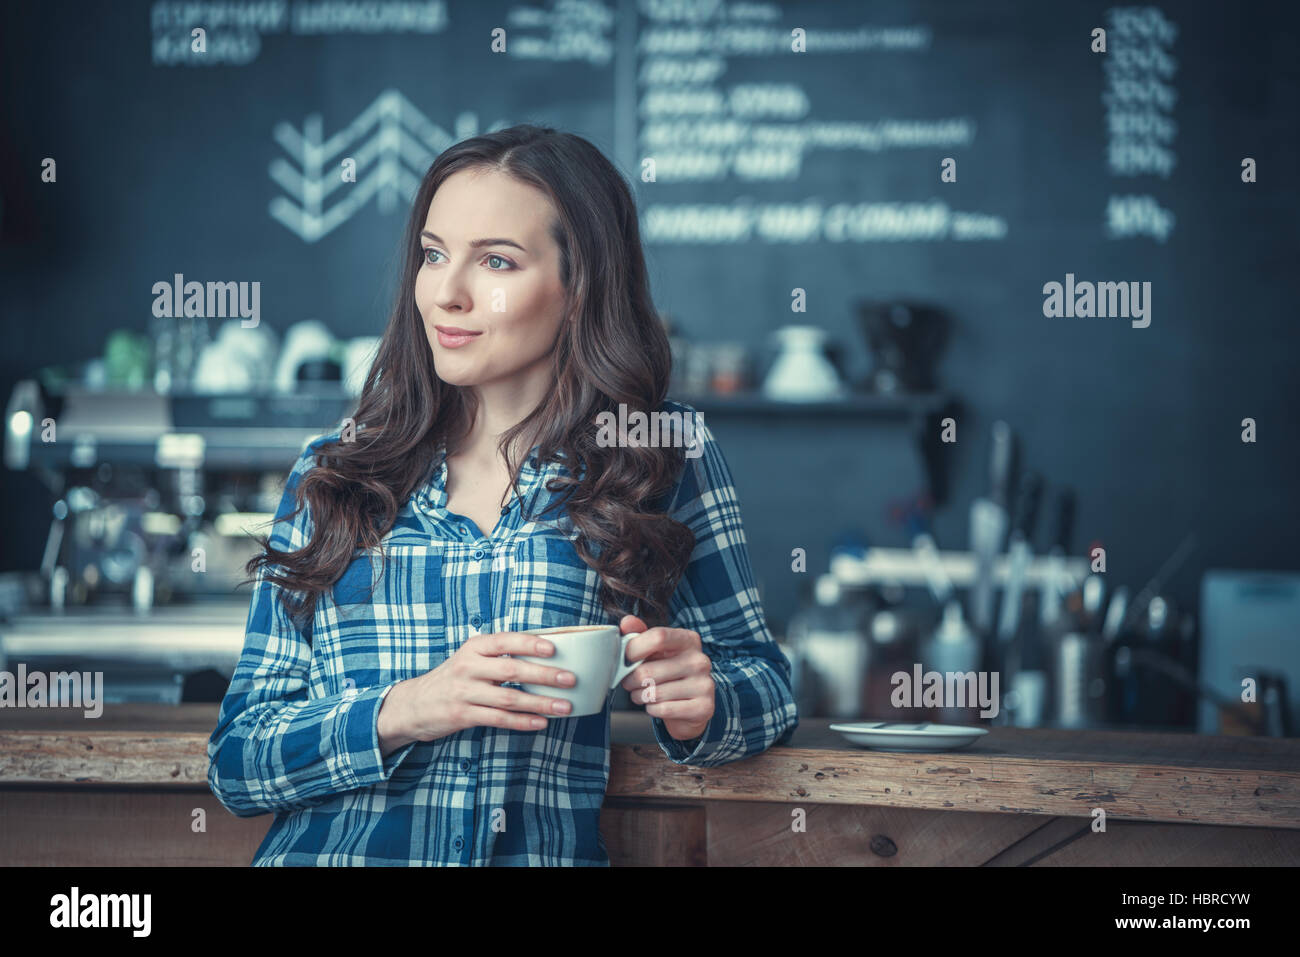 Young girl in a cafe Stock Photo